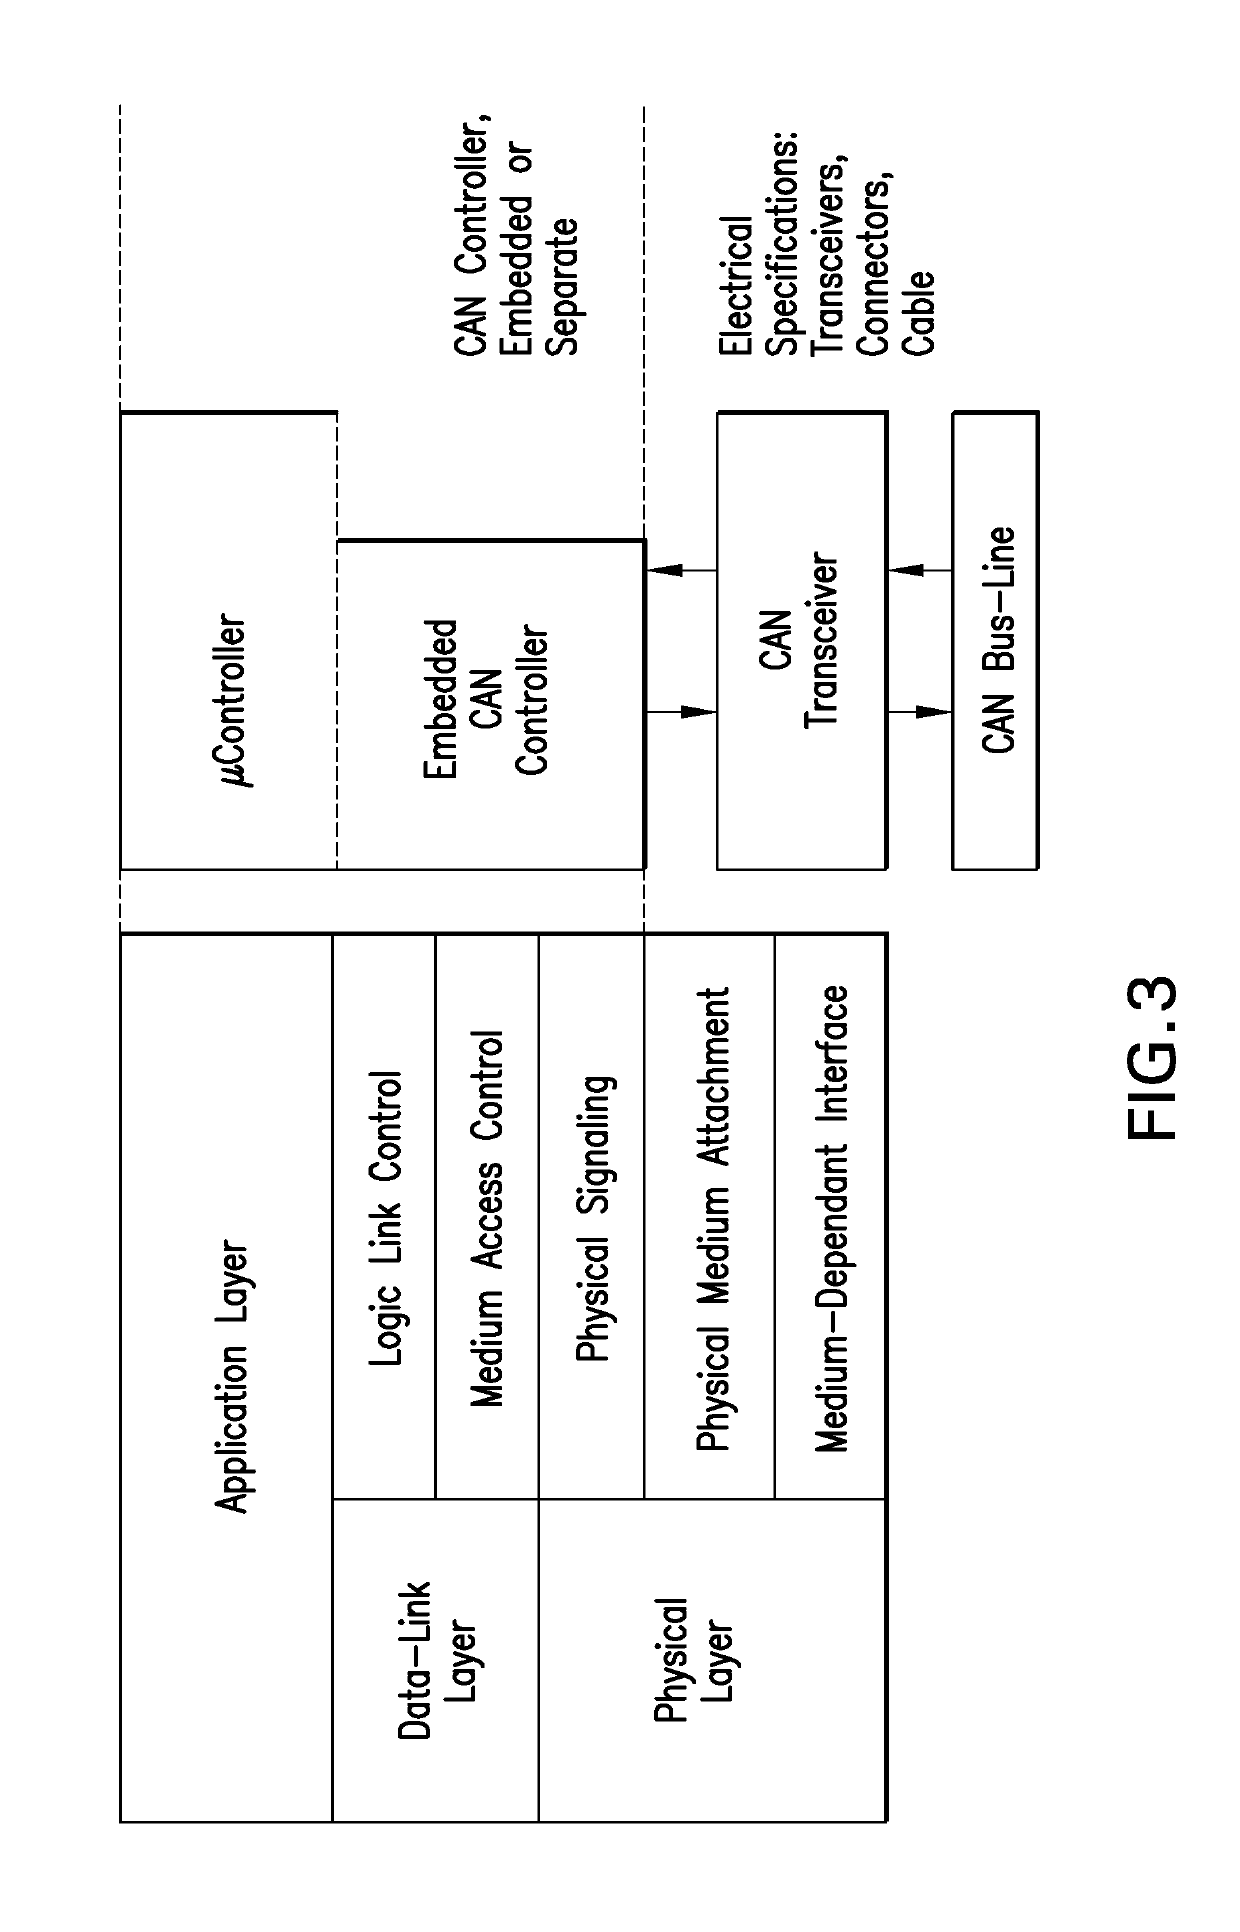 Hardware module-based authentication in intra-vehicle networks